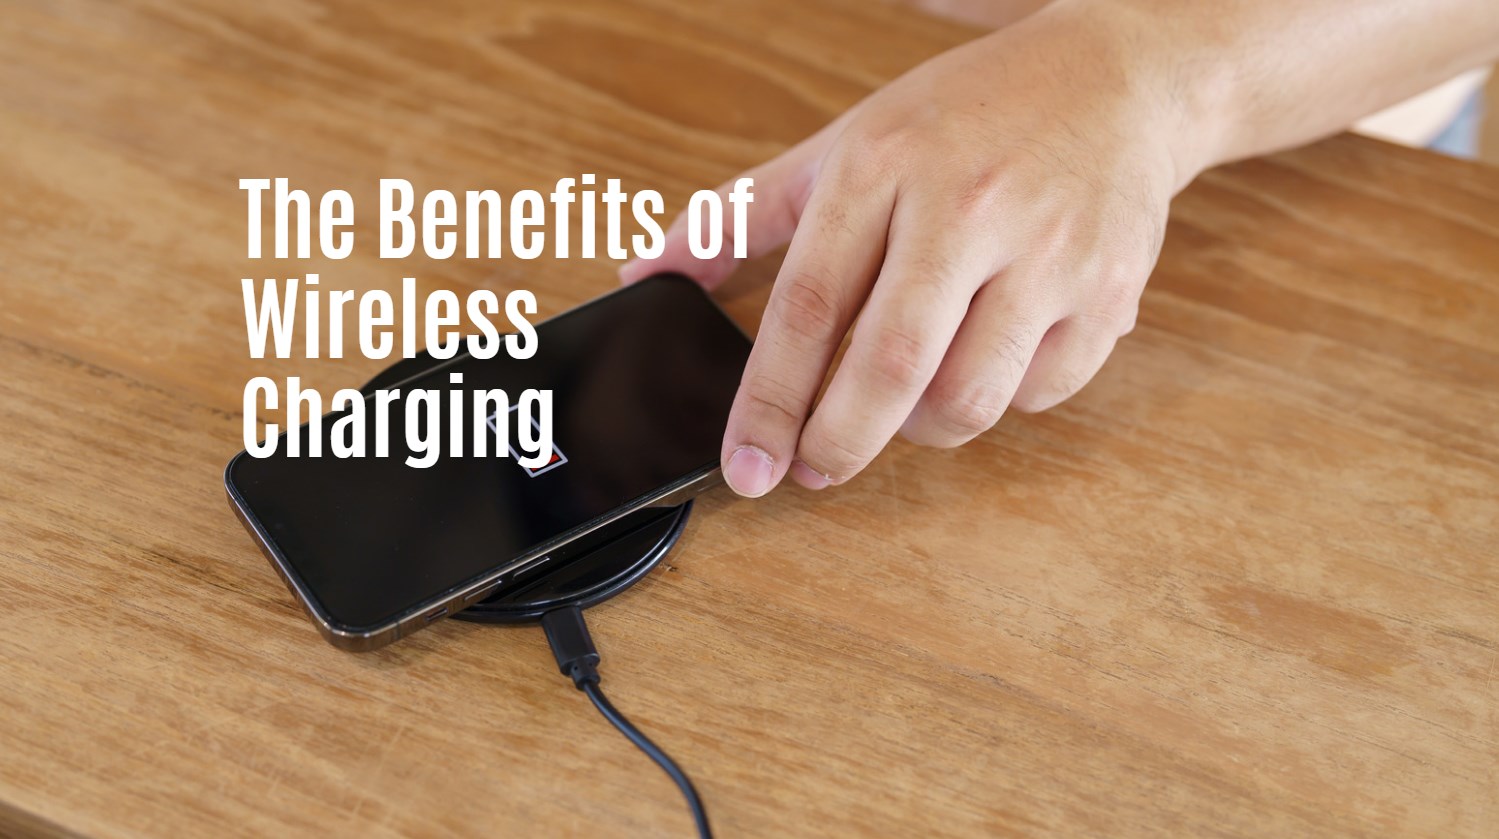 The Benefits of Wireless Charging